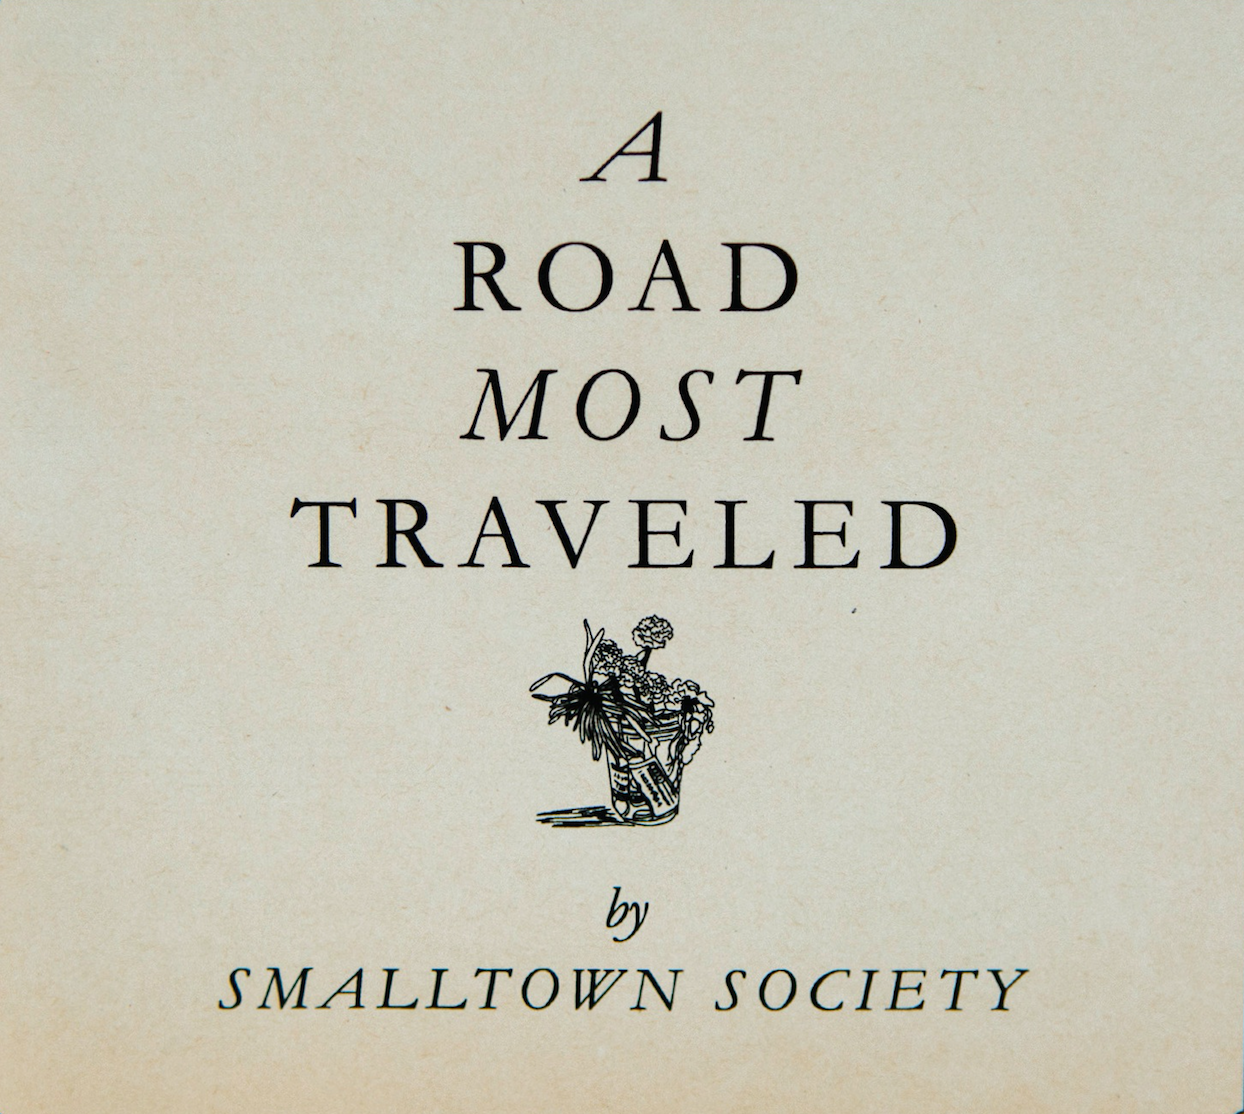 Smalltown Society - A Road Most Traveled